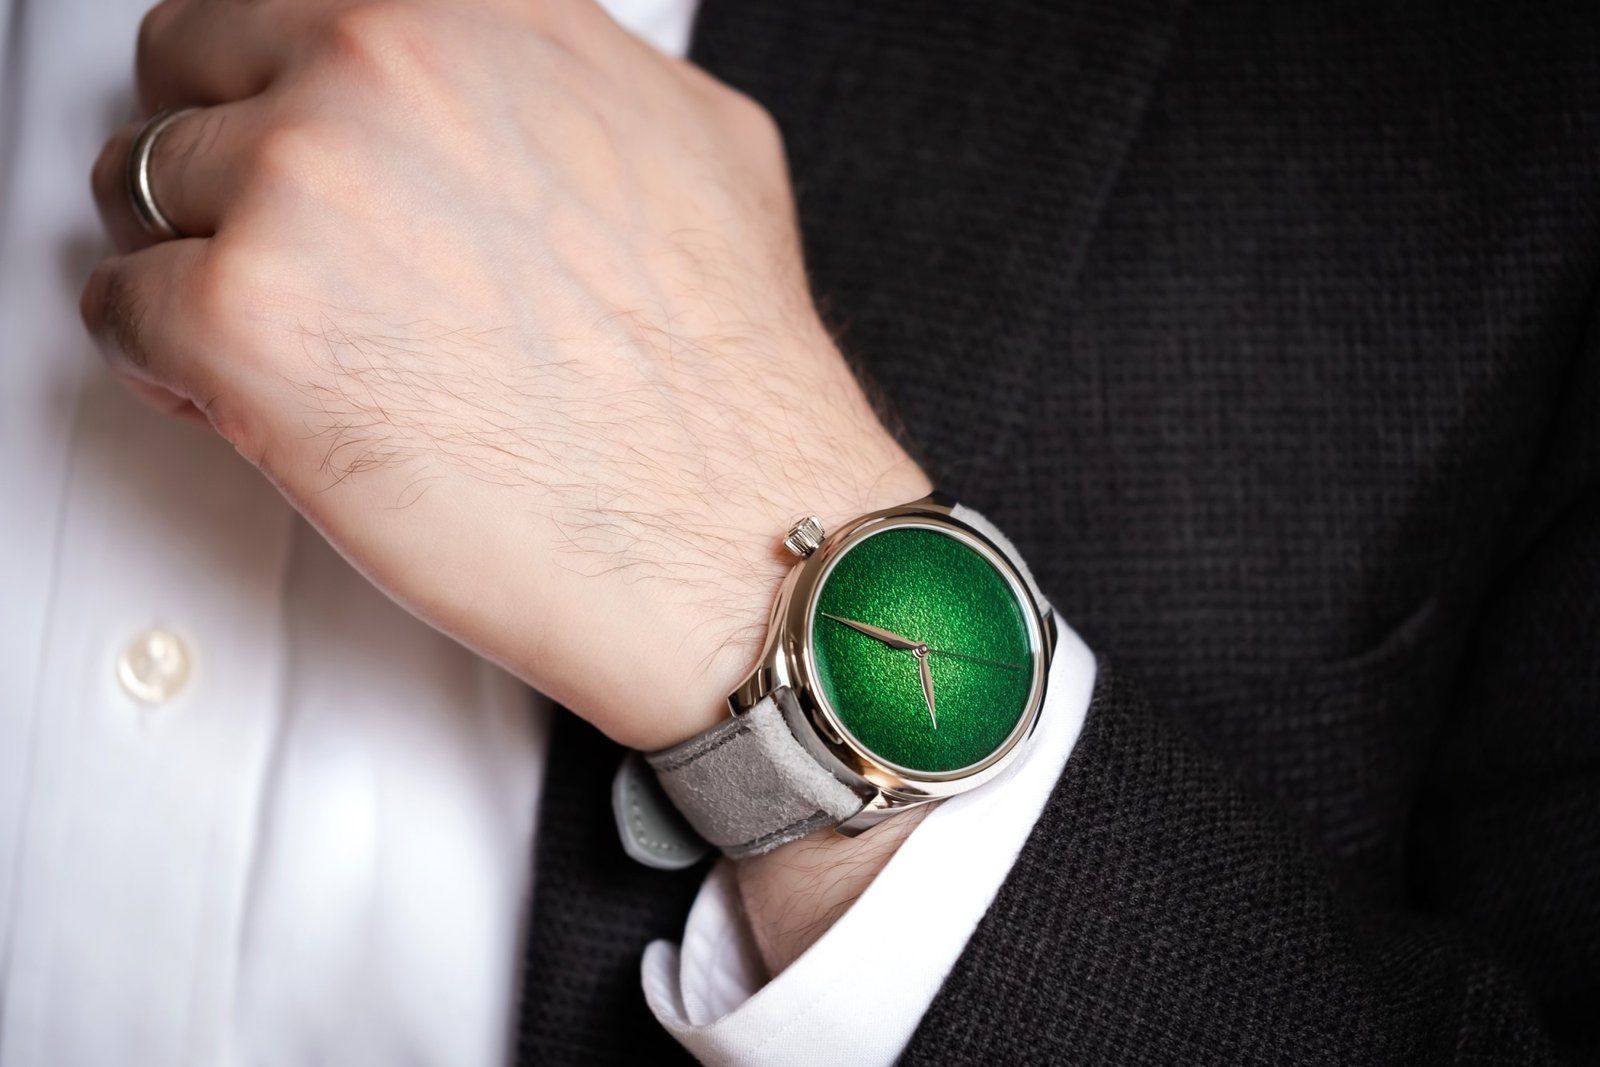  H. Moser & Cie- the Endeavour Centre Seconds Concept Lime Green Painting The World Green